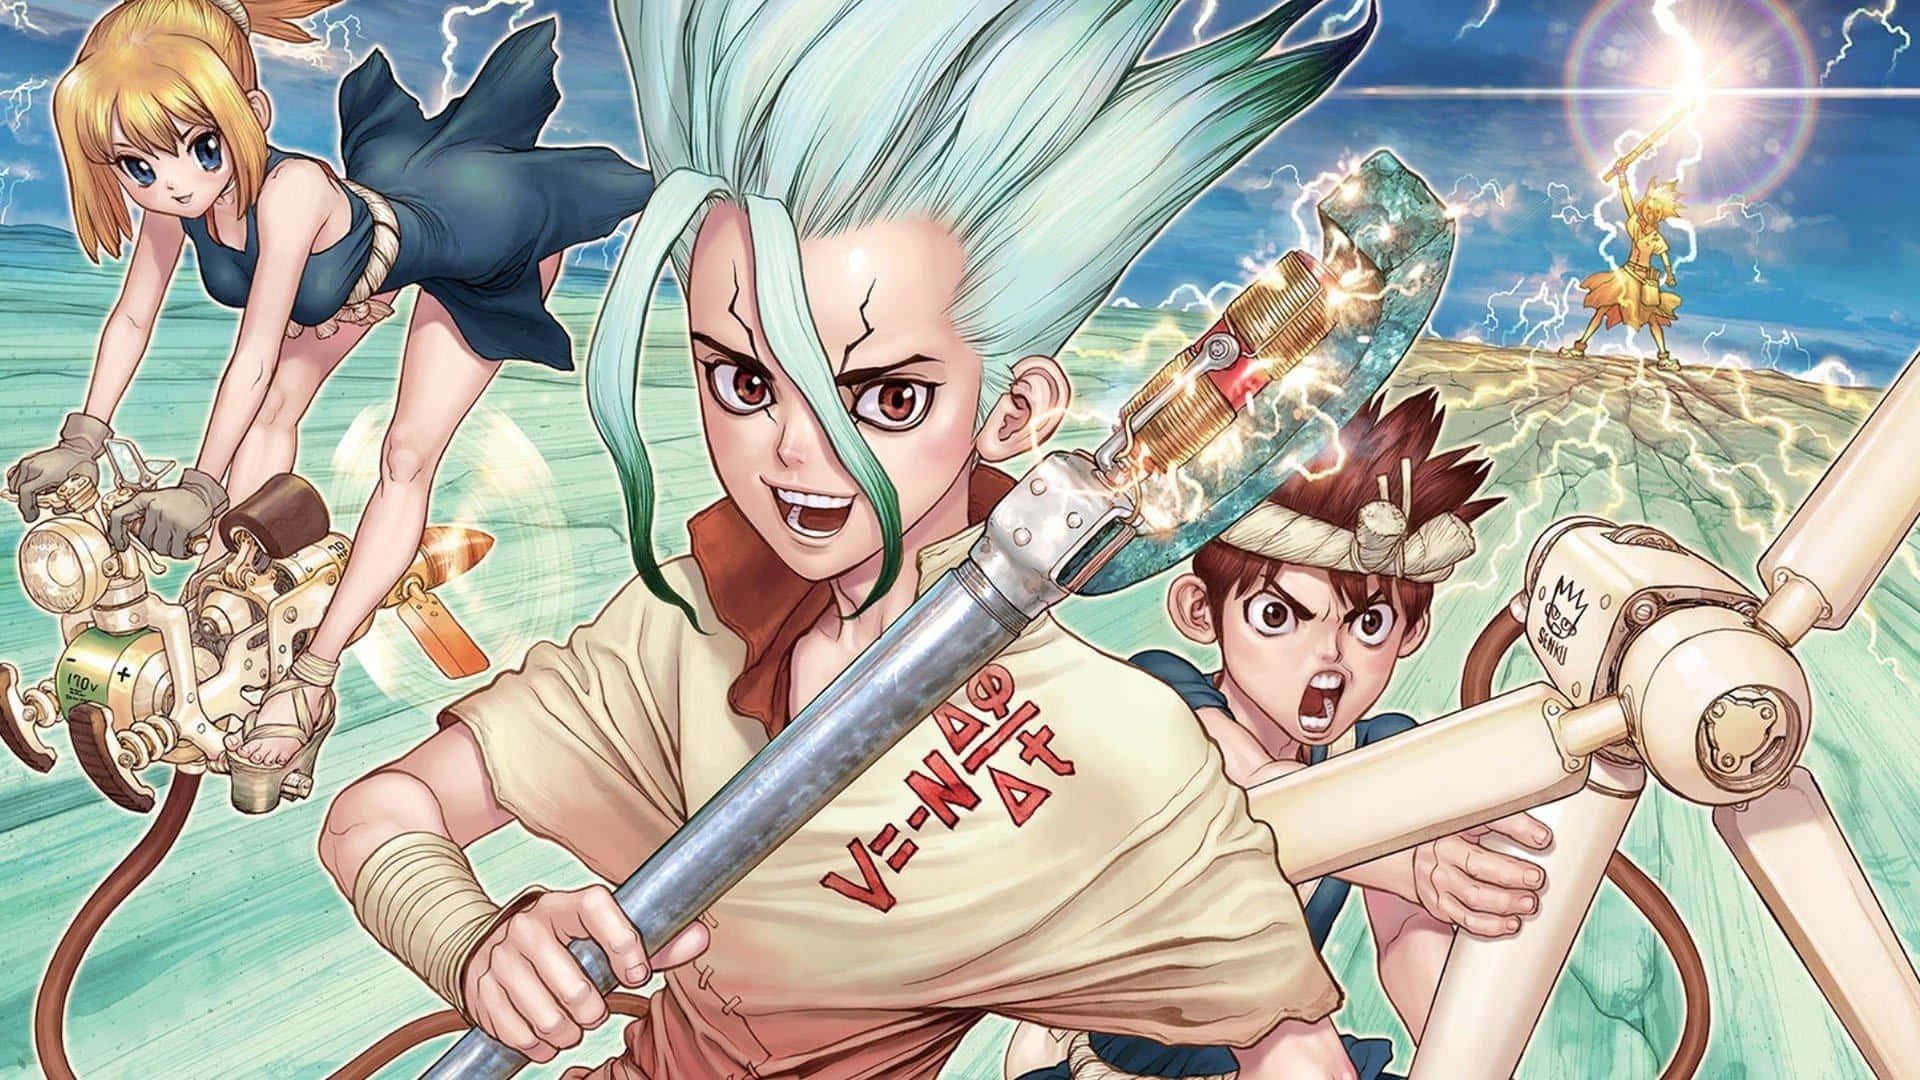 A View Into the Remarkable World of Dr. Stone